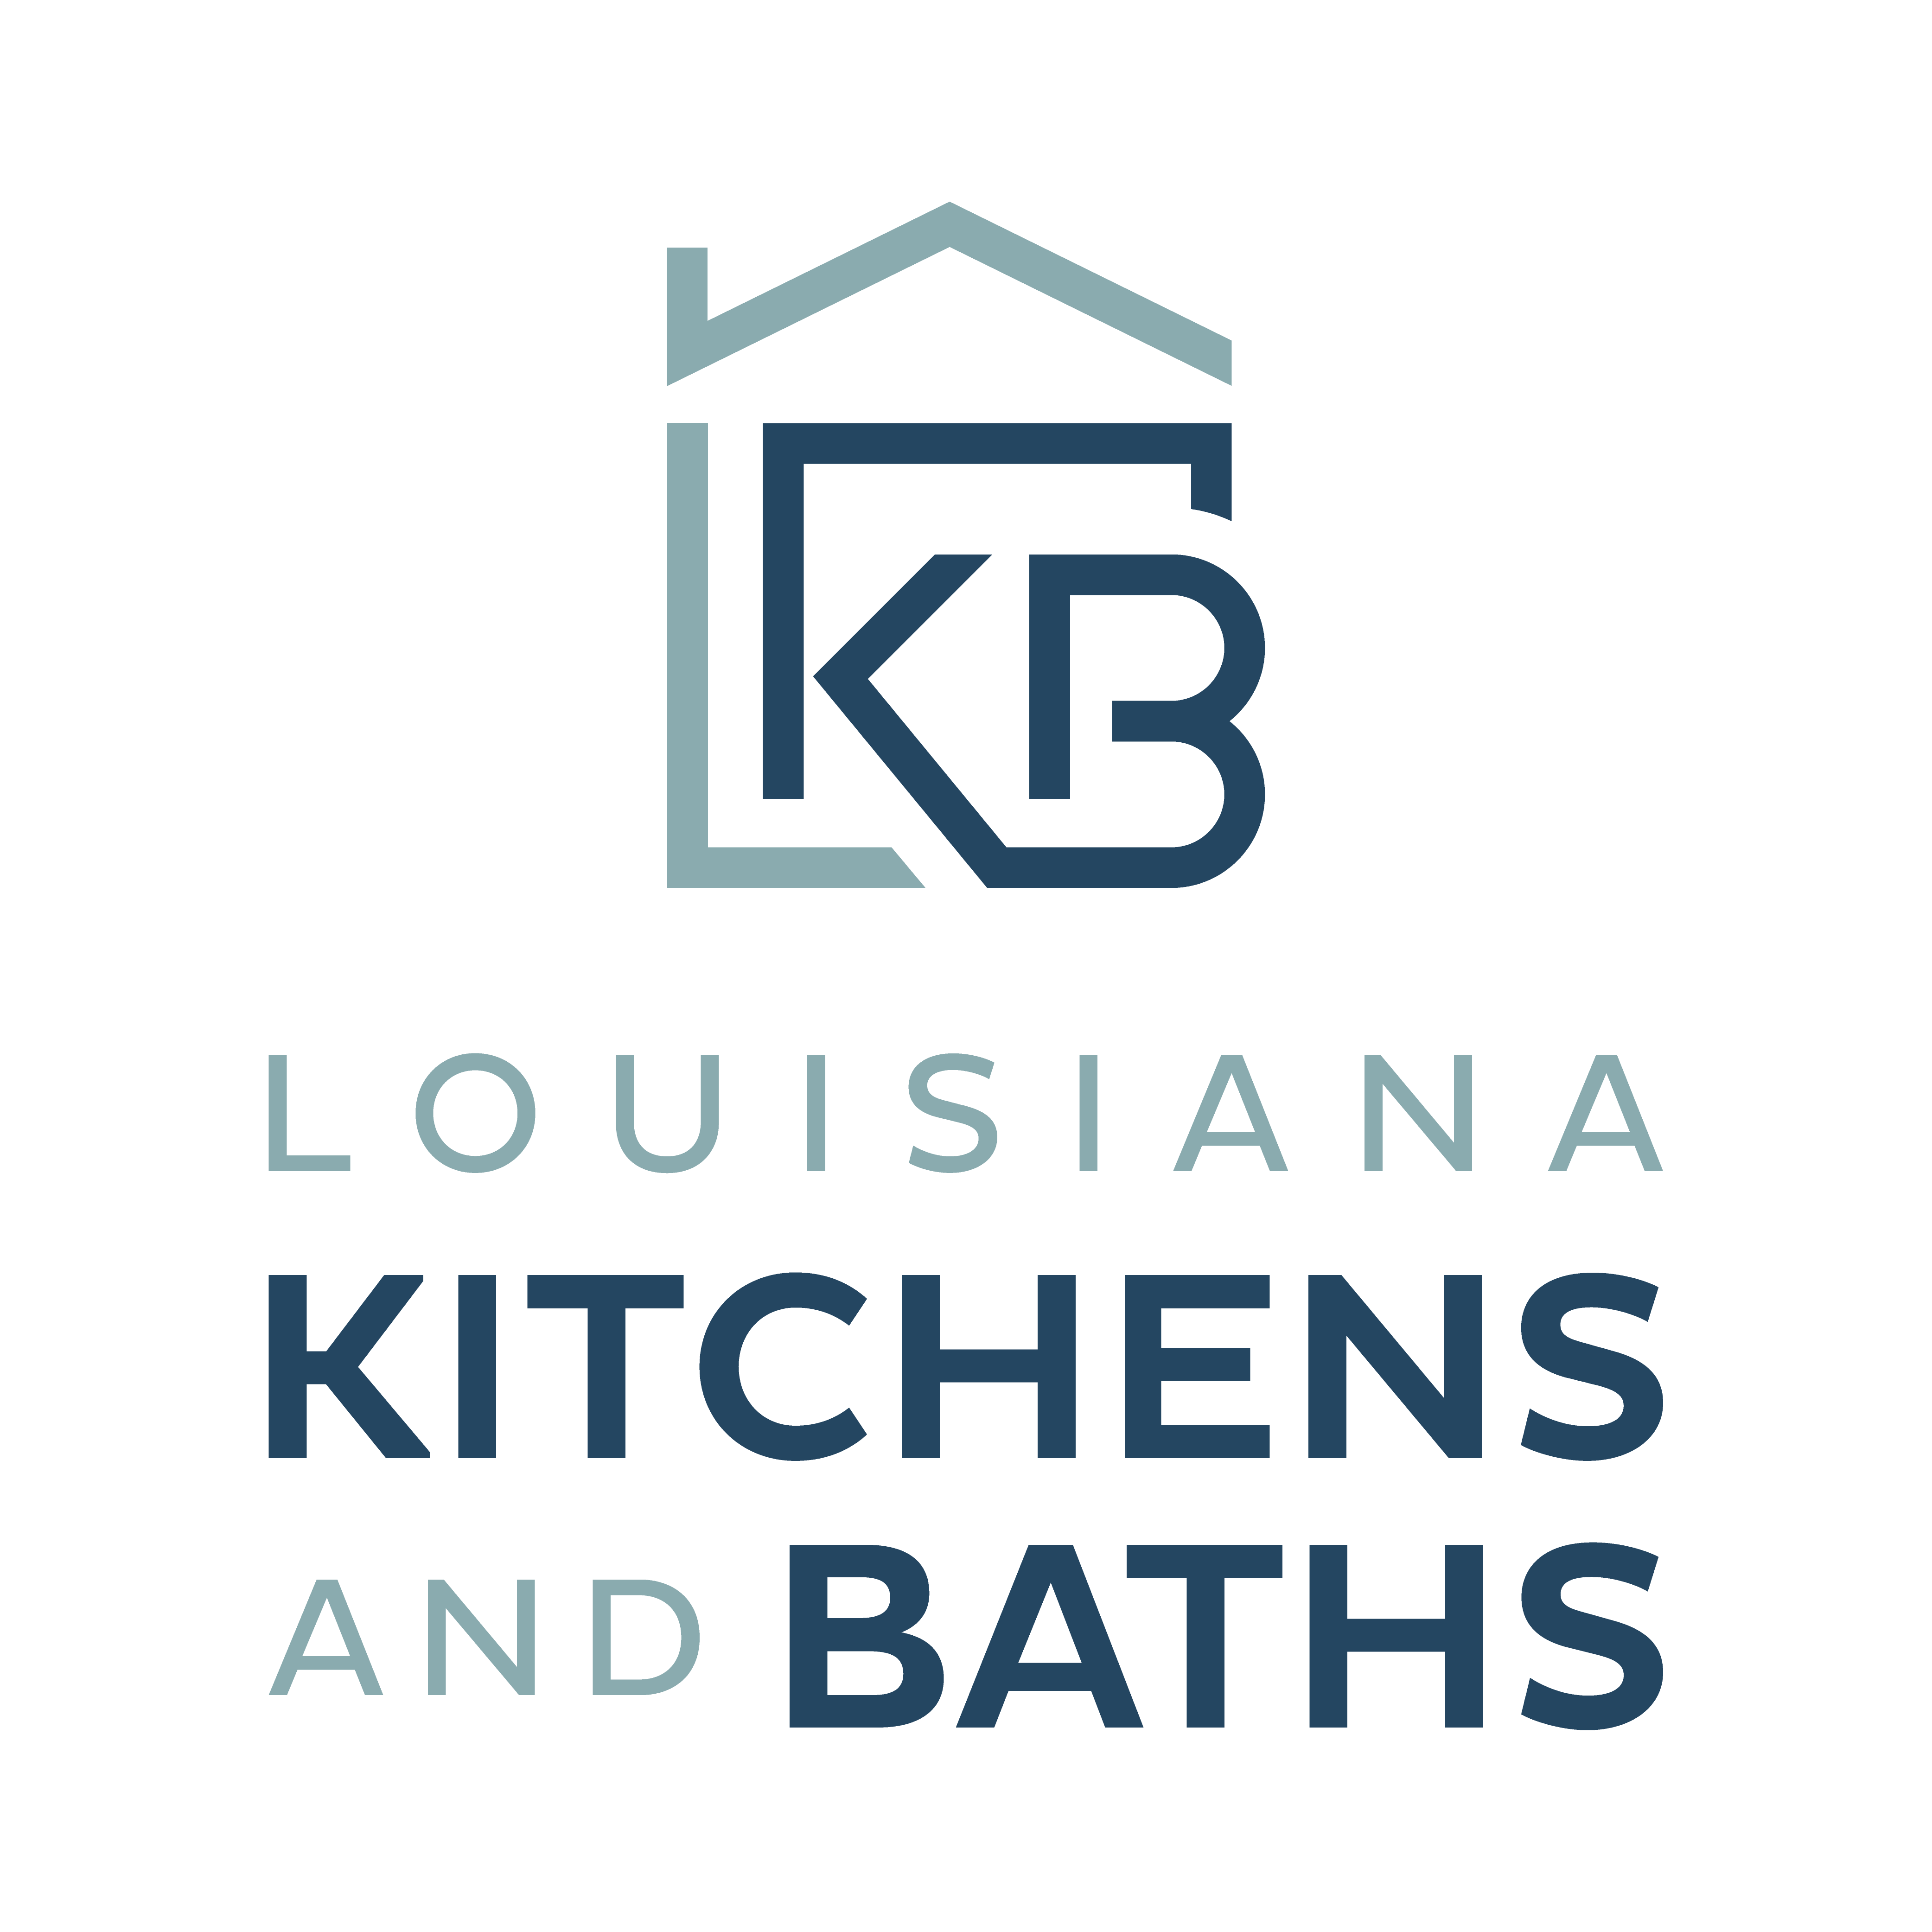 Louisiana Kitchens & Baths (positive) logo design by logo designer Freshwater Design for your inspiration and for the worlds largest logo competition